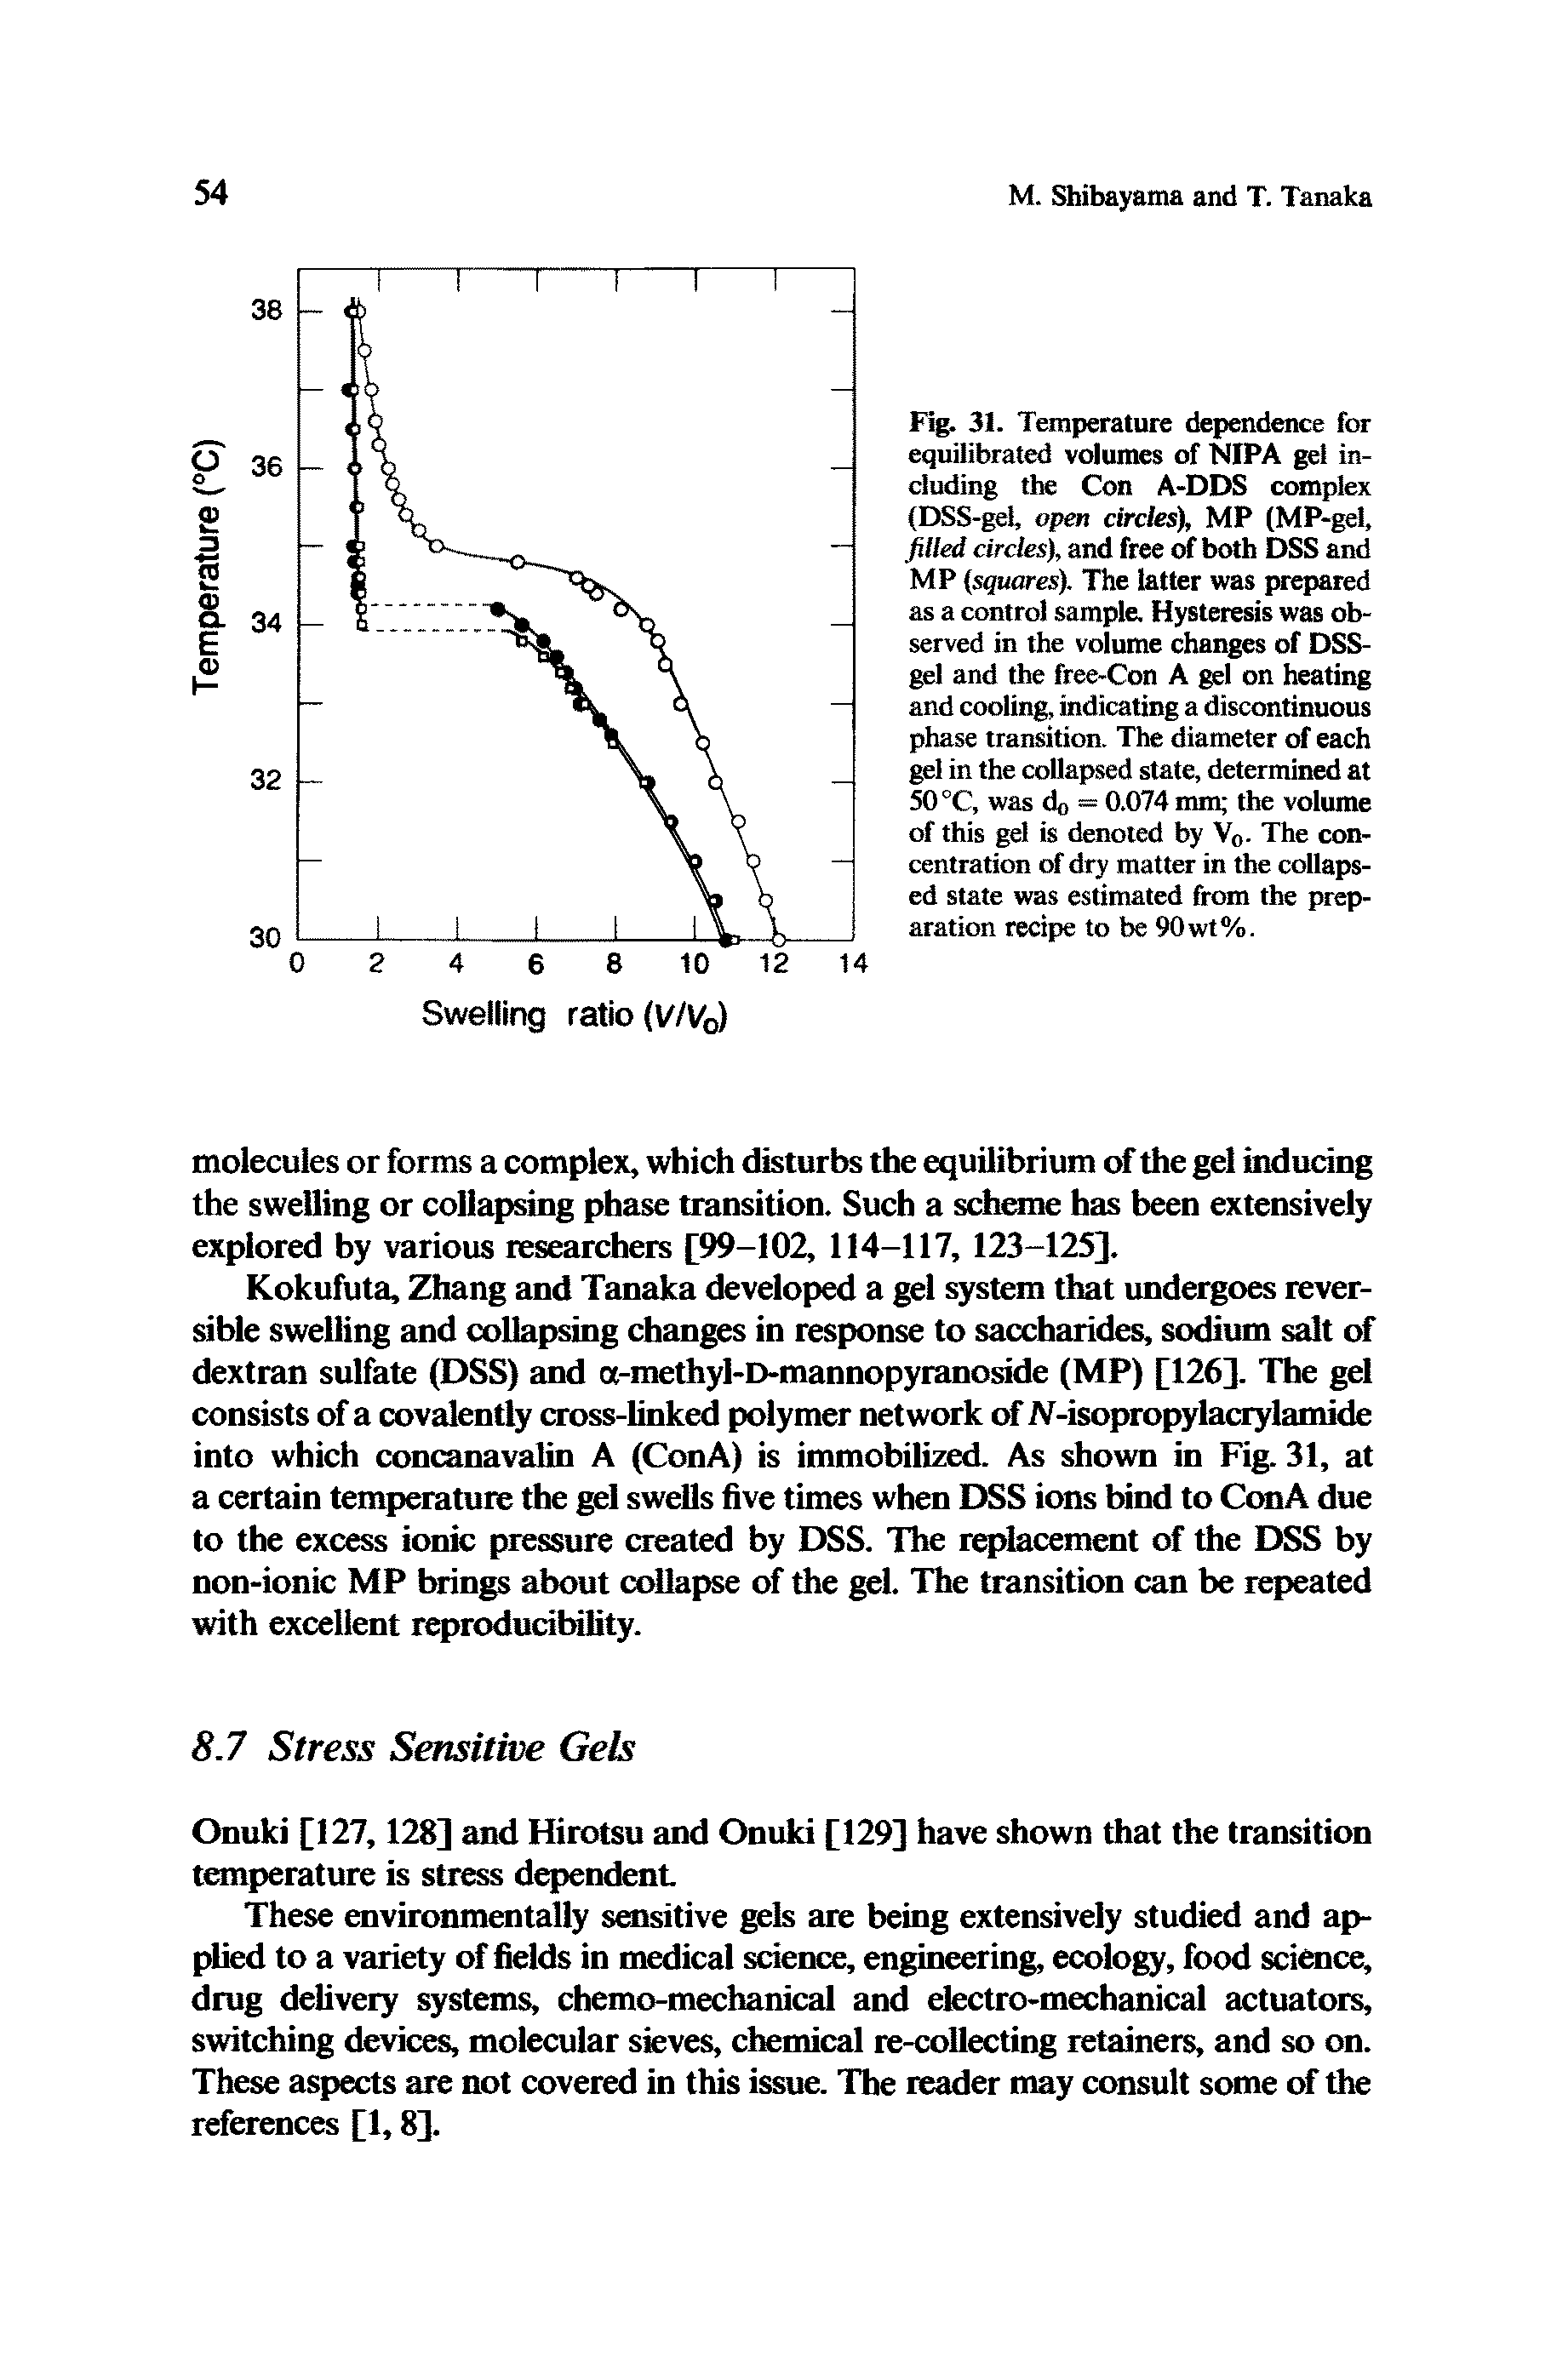 Fig. 31. Temperature dependence for equilibrated volumes of NIPA gel including the Con A-DDS complex (DSS-gel, open circles), MP (MP-gel, filled circles), and free of both DSS and MP squares). The latter was prepared as a control sample. Hysteresis was observed in the volume changes of DSS-gel and the free-Con A gel on heating and cooling, indicating a discontinuous phase transition. The diameter of each gel in the collapsed state, determined at 50 °C, was do = 0.074 mm the volume of this gel is denoted by V0. The concentration of dry matter in the collapsed state was estimated from the preparation recipe to be 90wt%.